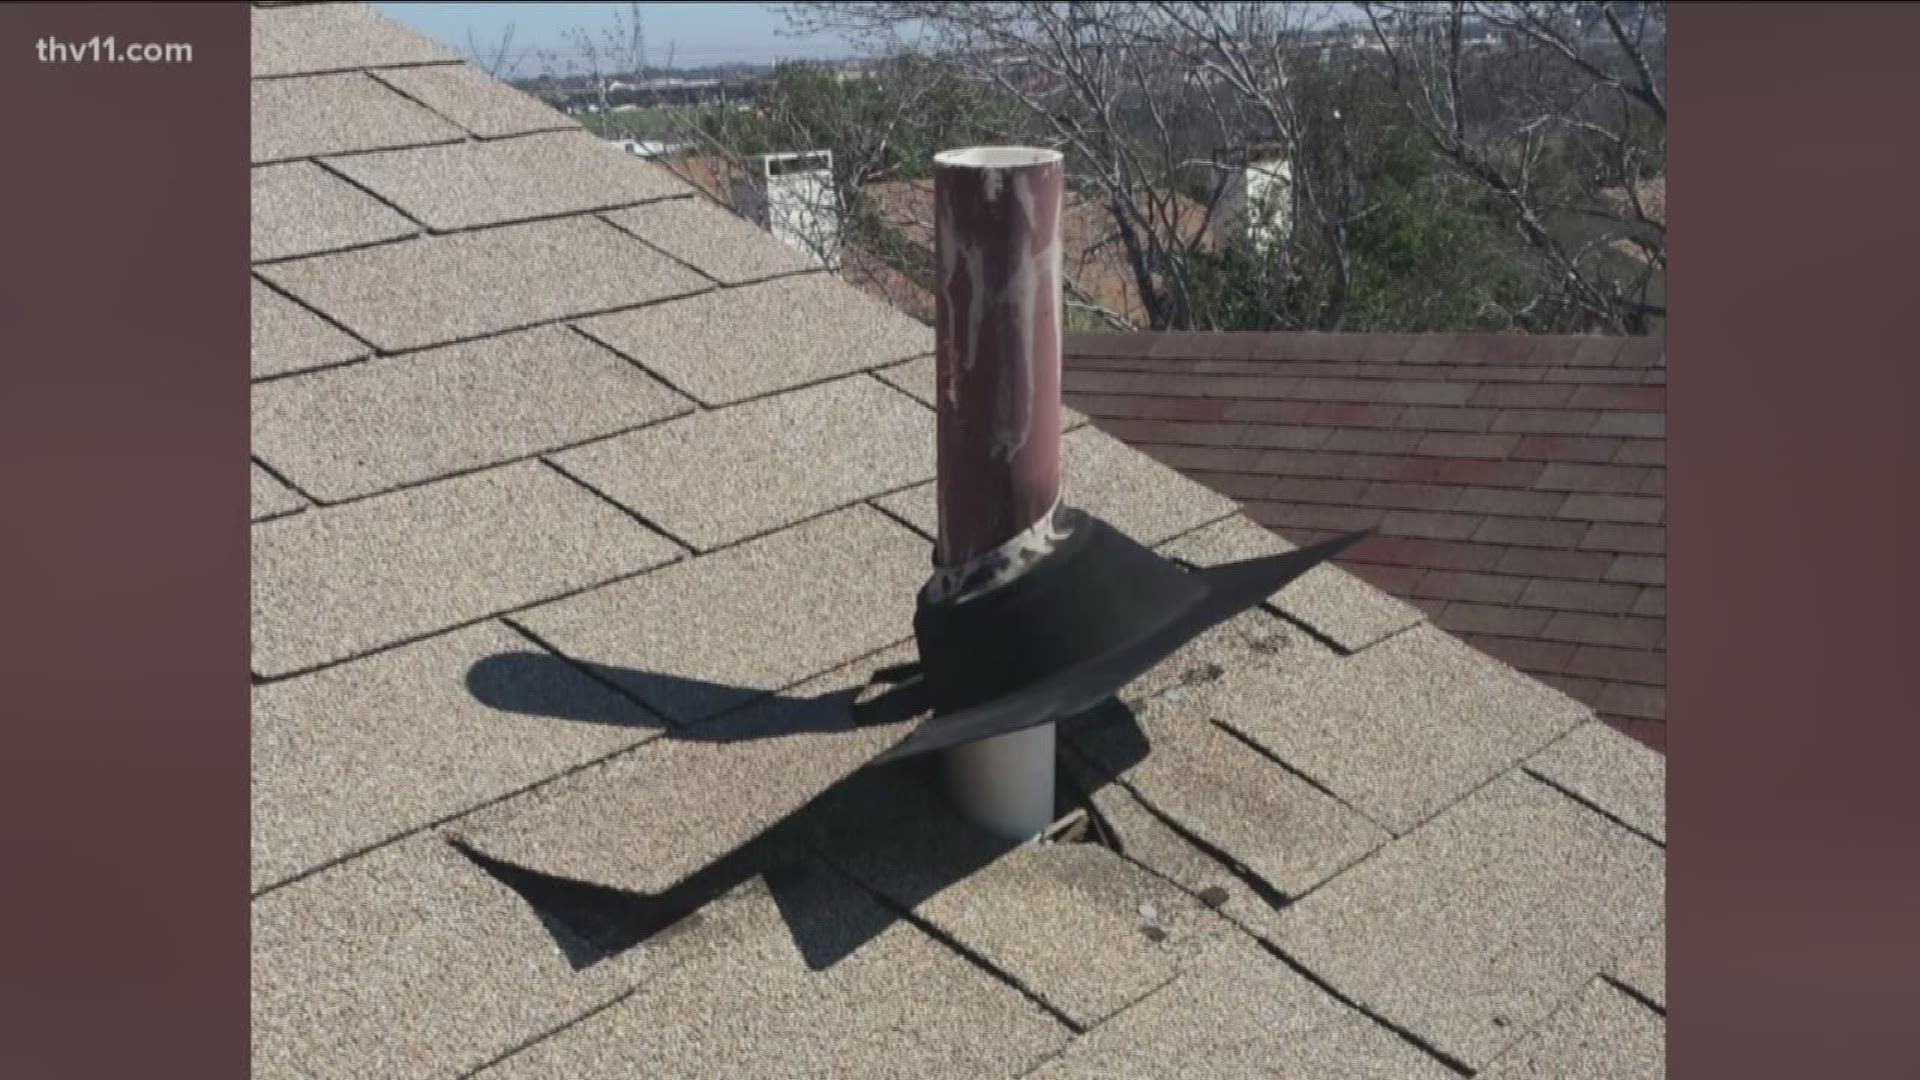 Paul Kroger is here with some tips on repairing your roof.